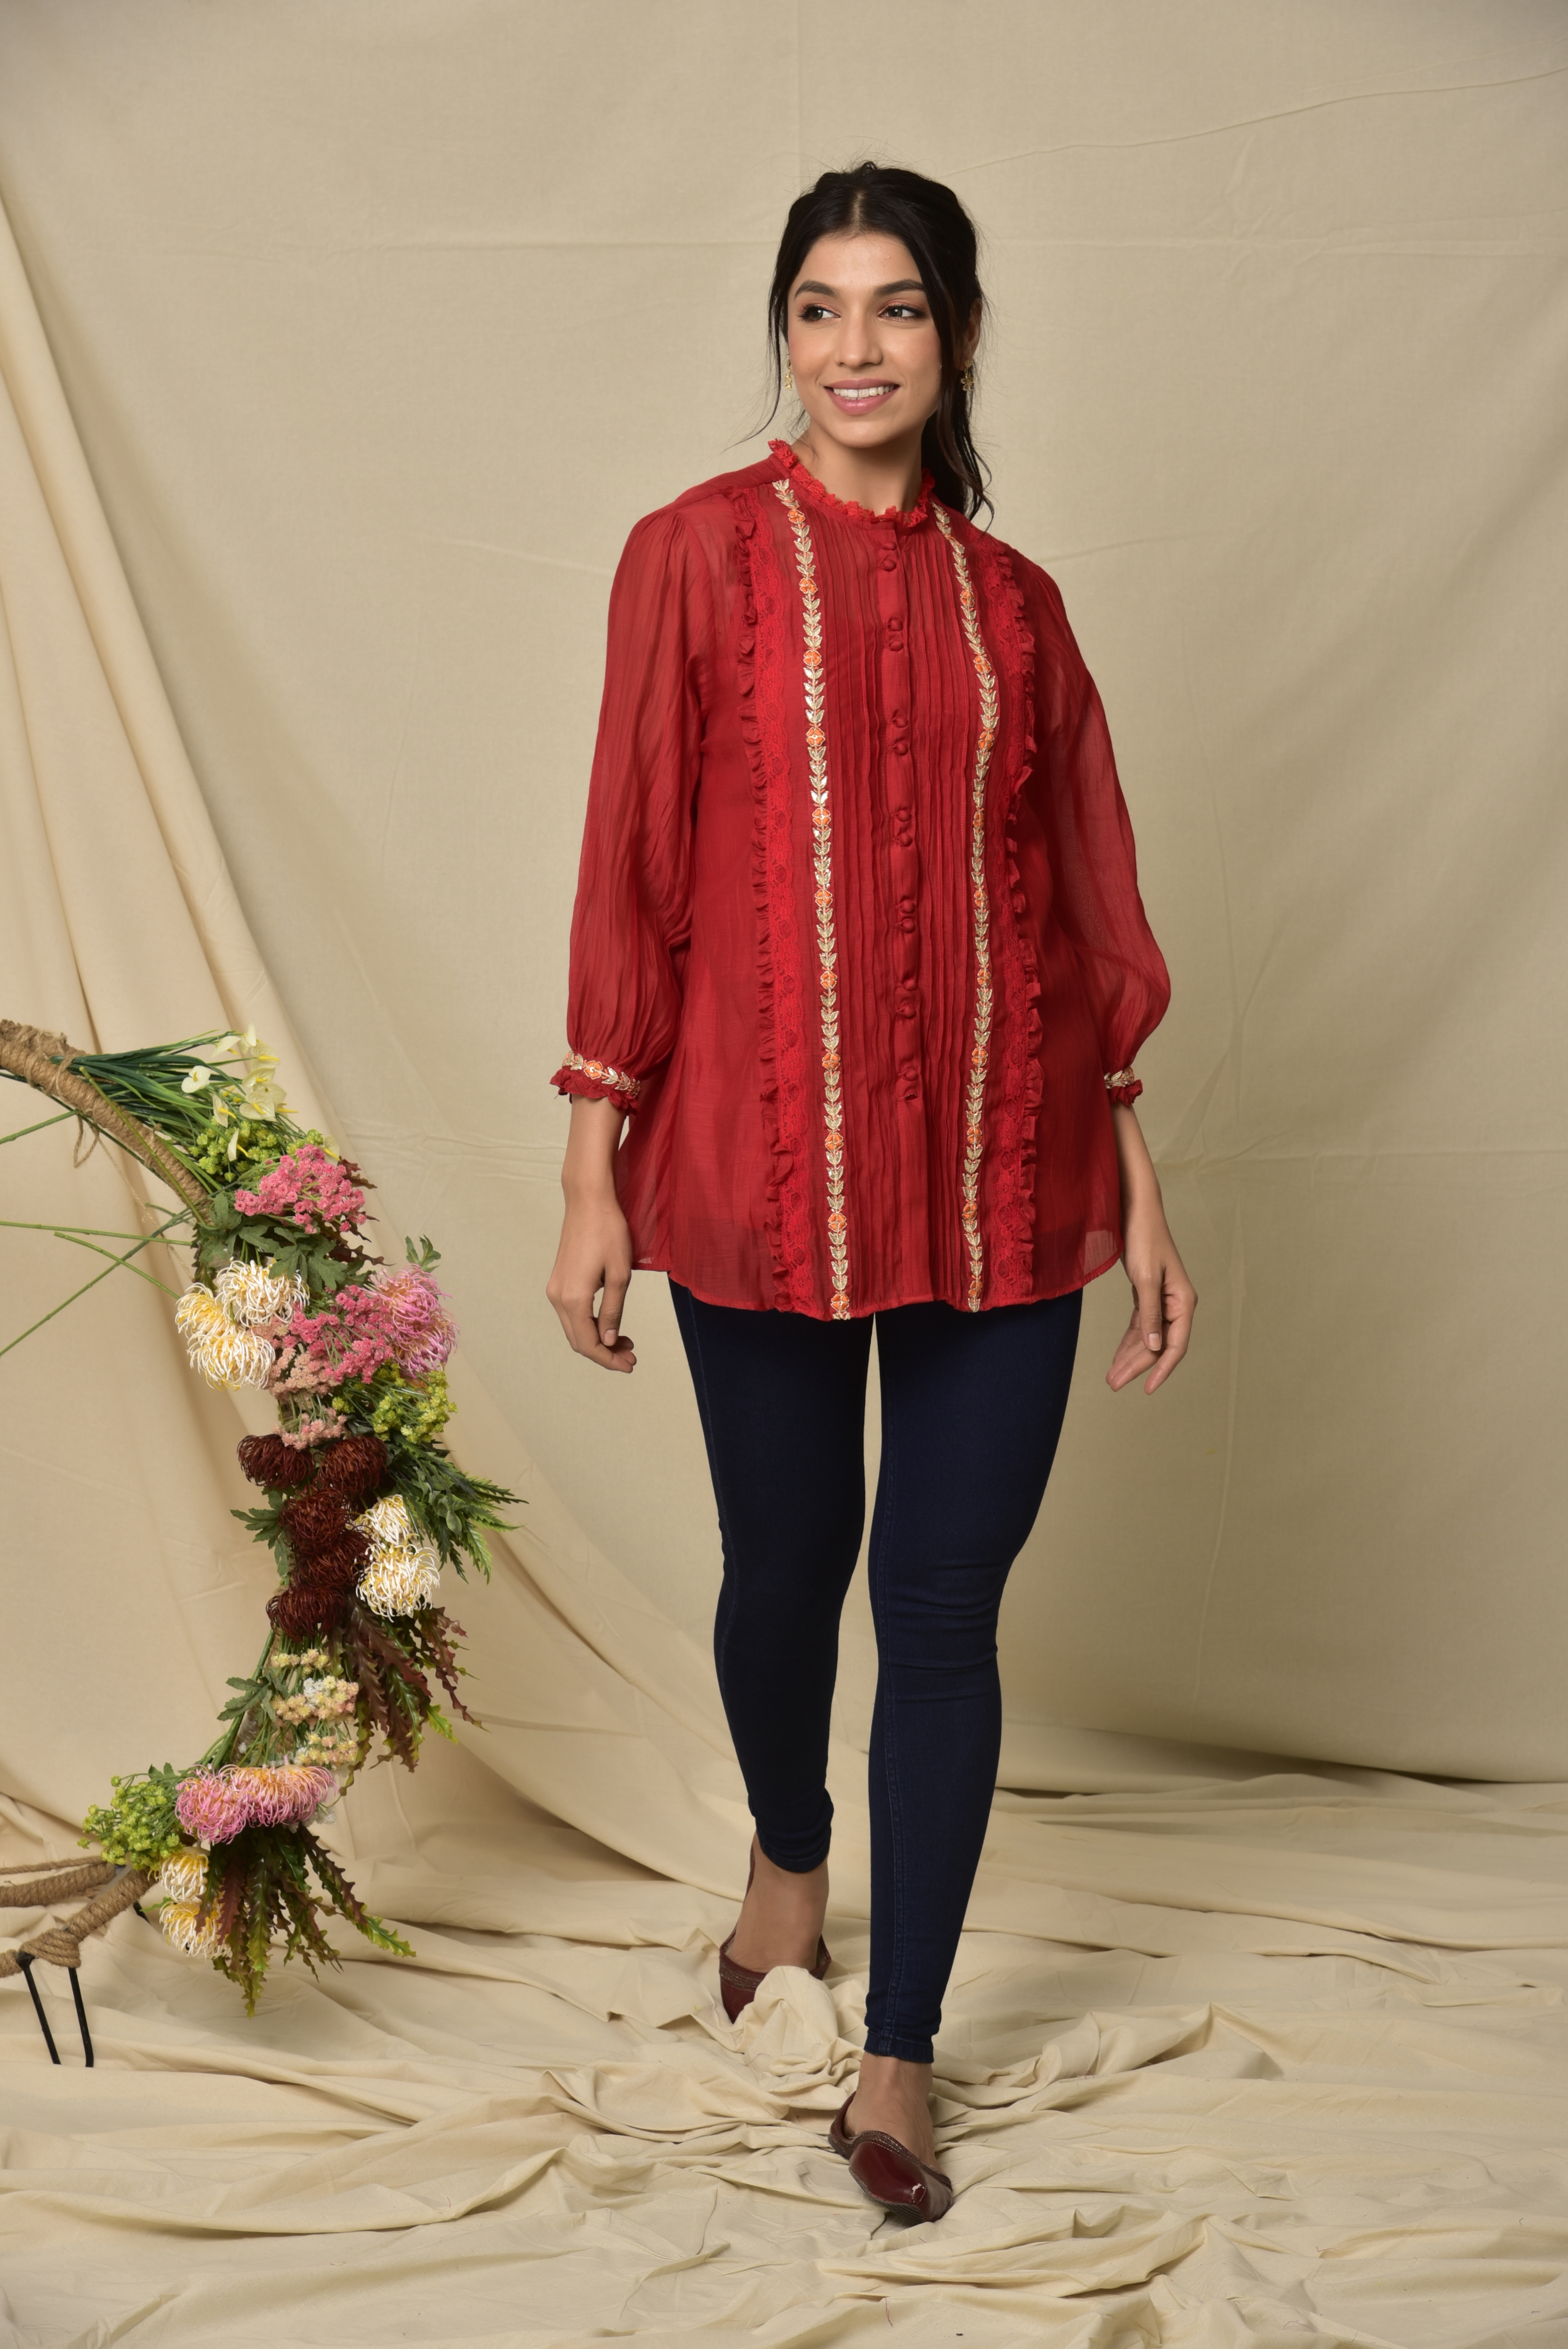 KAARAH BY KAAVYA | Red Chanderi Lace Top With Gota Border on Both Side undefined